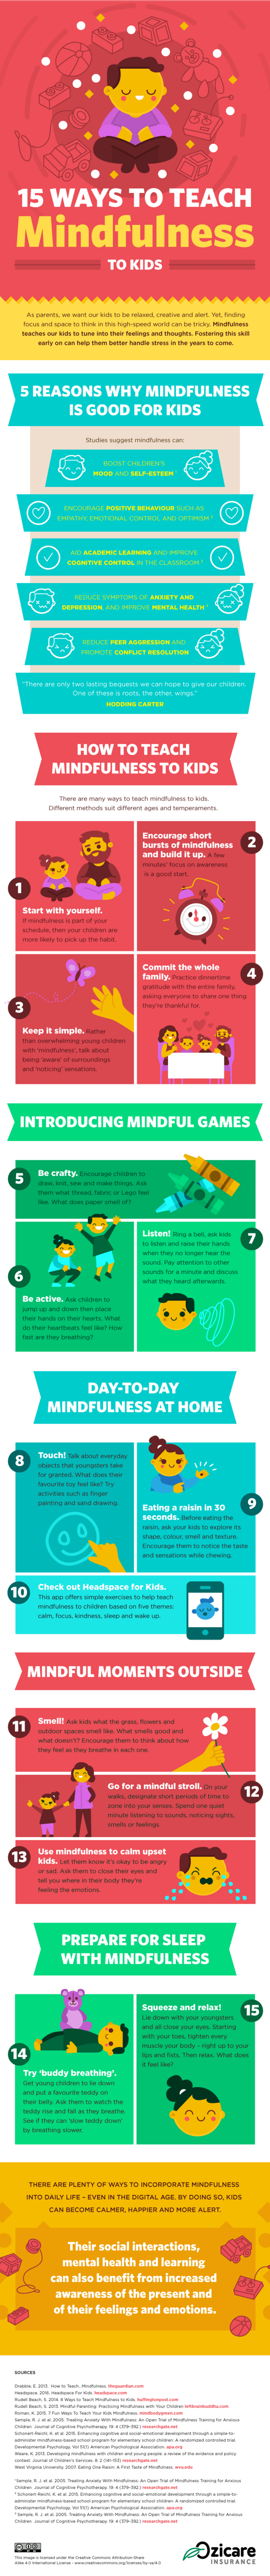 15 Ways To Teach Patience And Mindfulness To Children [Infographic]